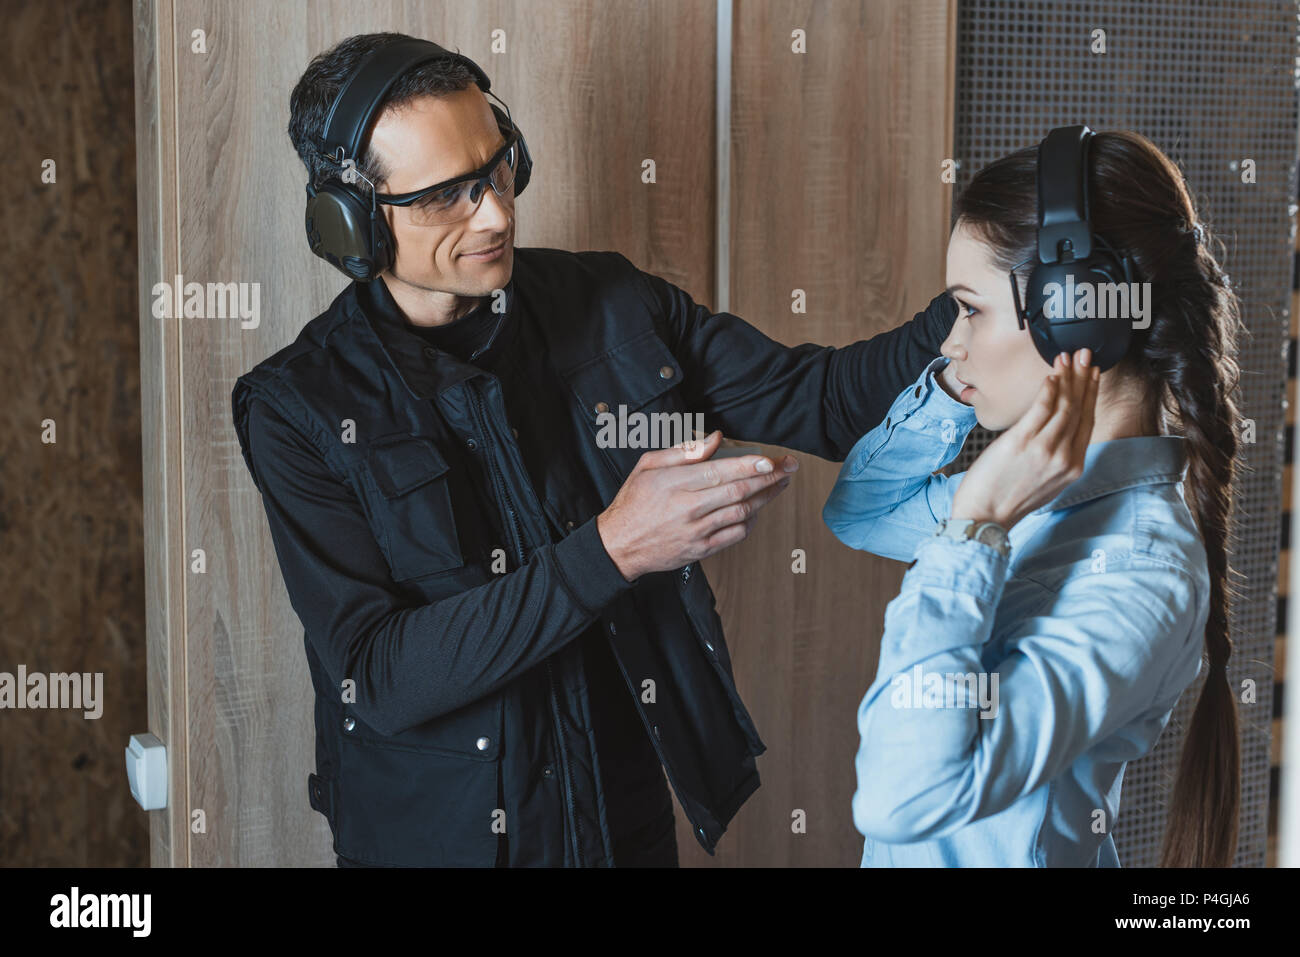 female client wearing ear muffs in shooting range Stock Photo